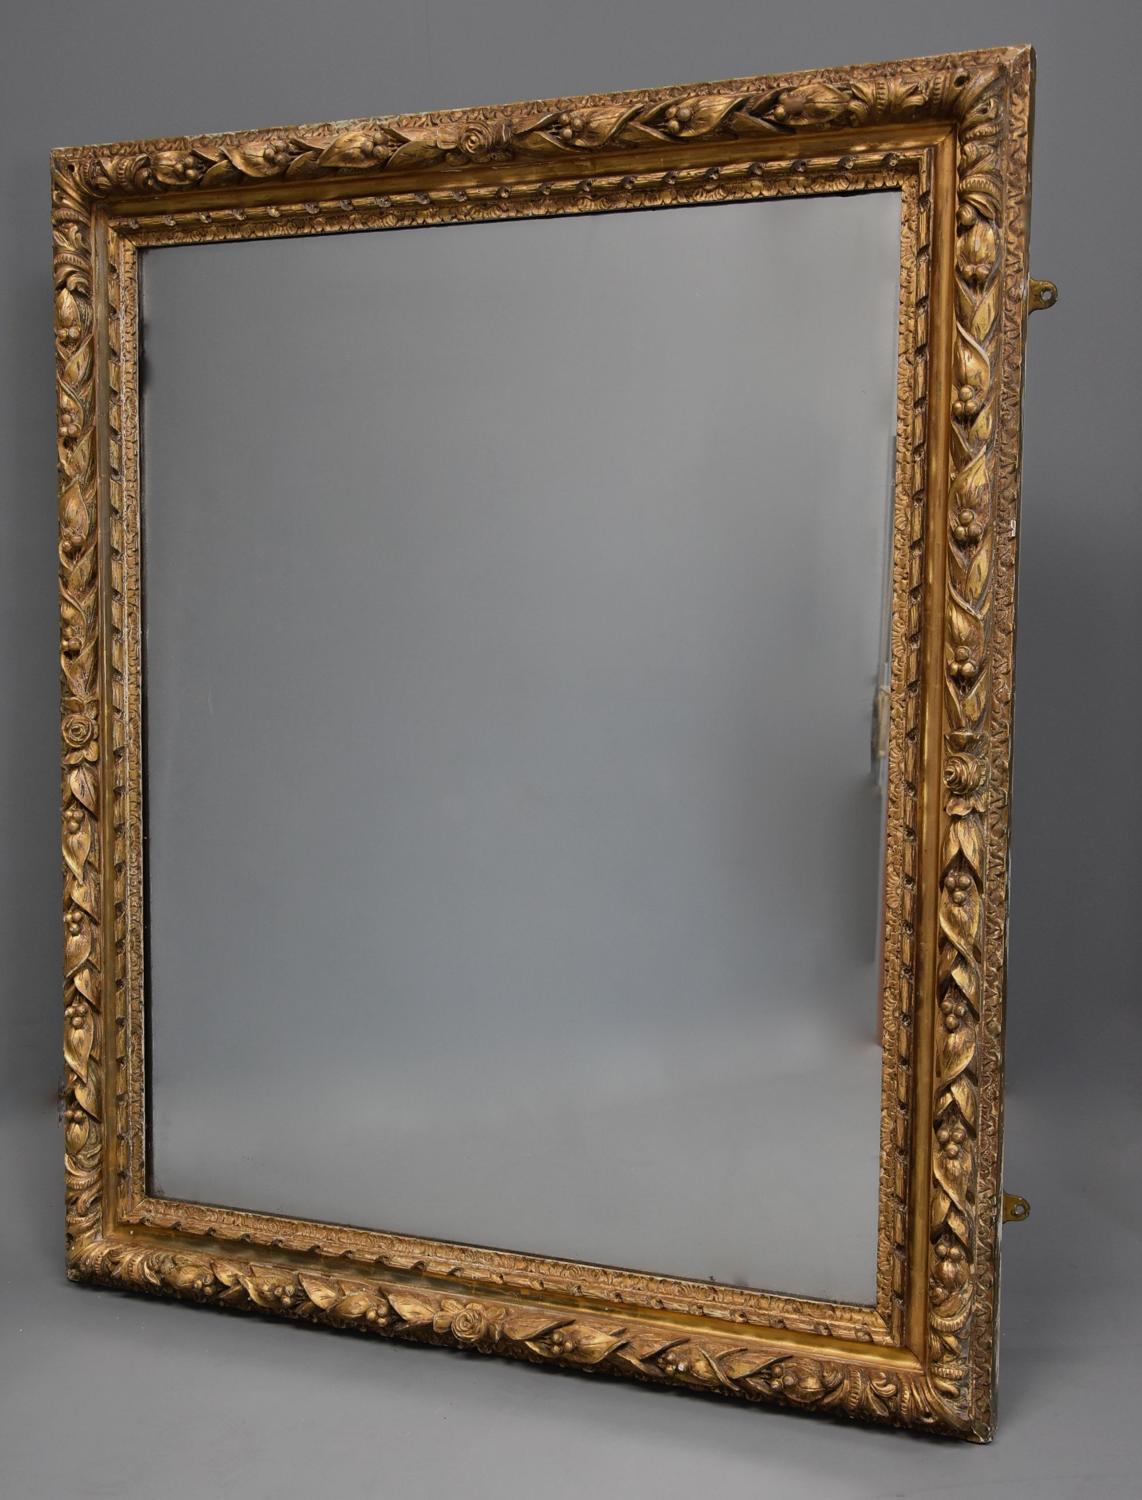 Large 19th century carved giltwood mirror, possibly French